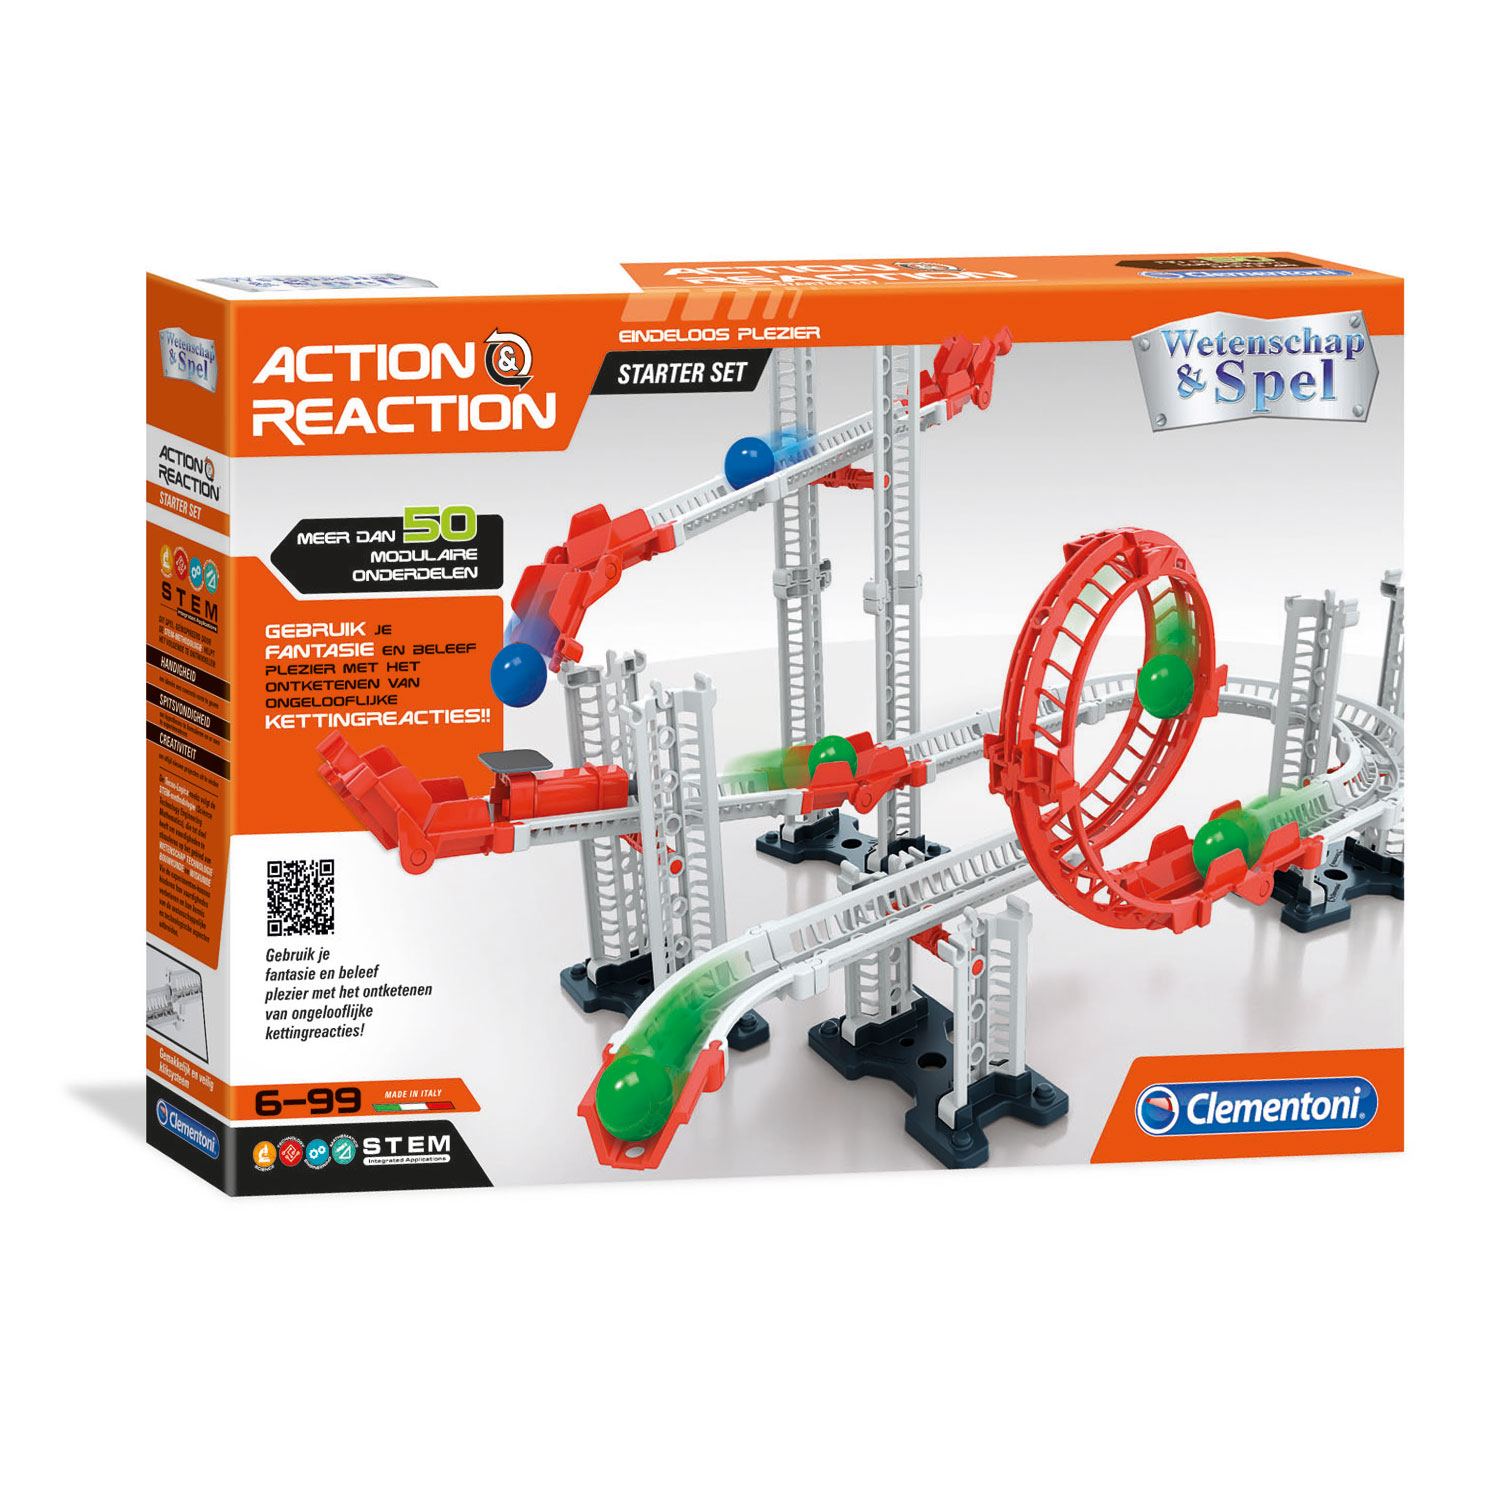 Action & Reaction Glow Effect – Clementoni BE